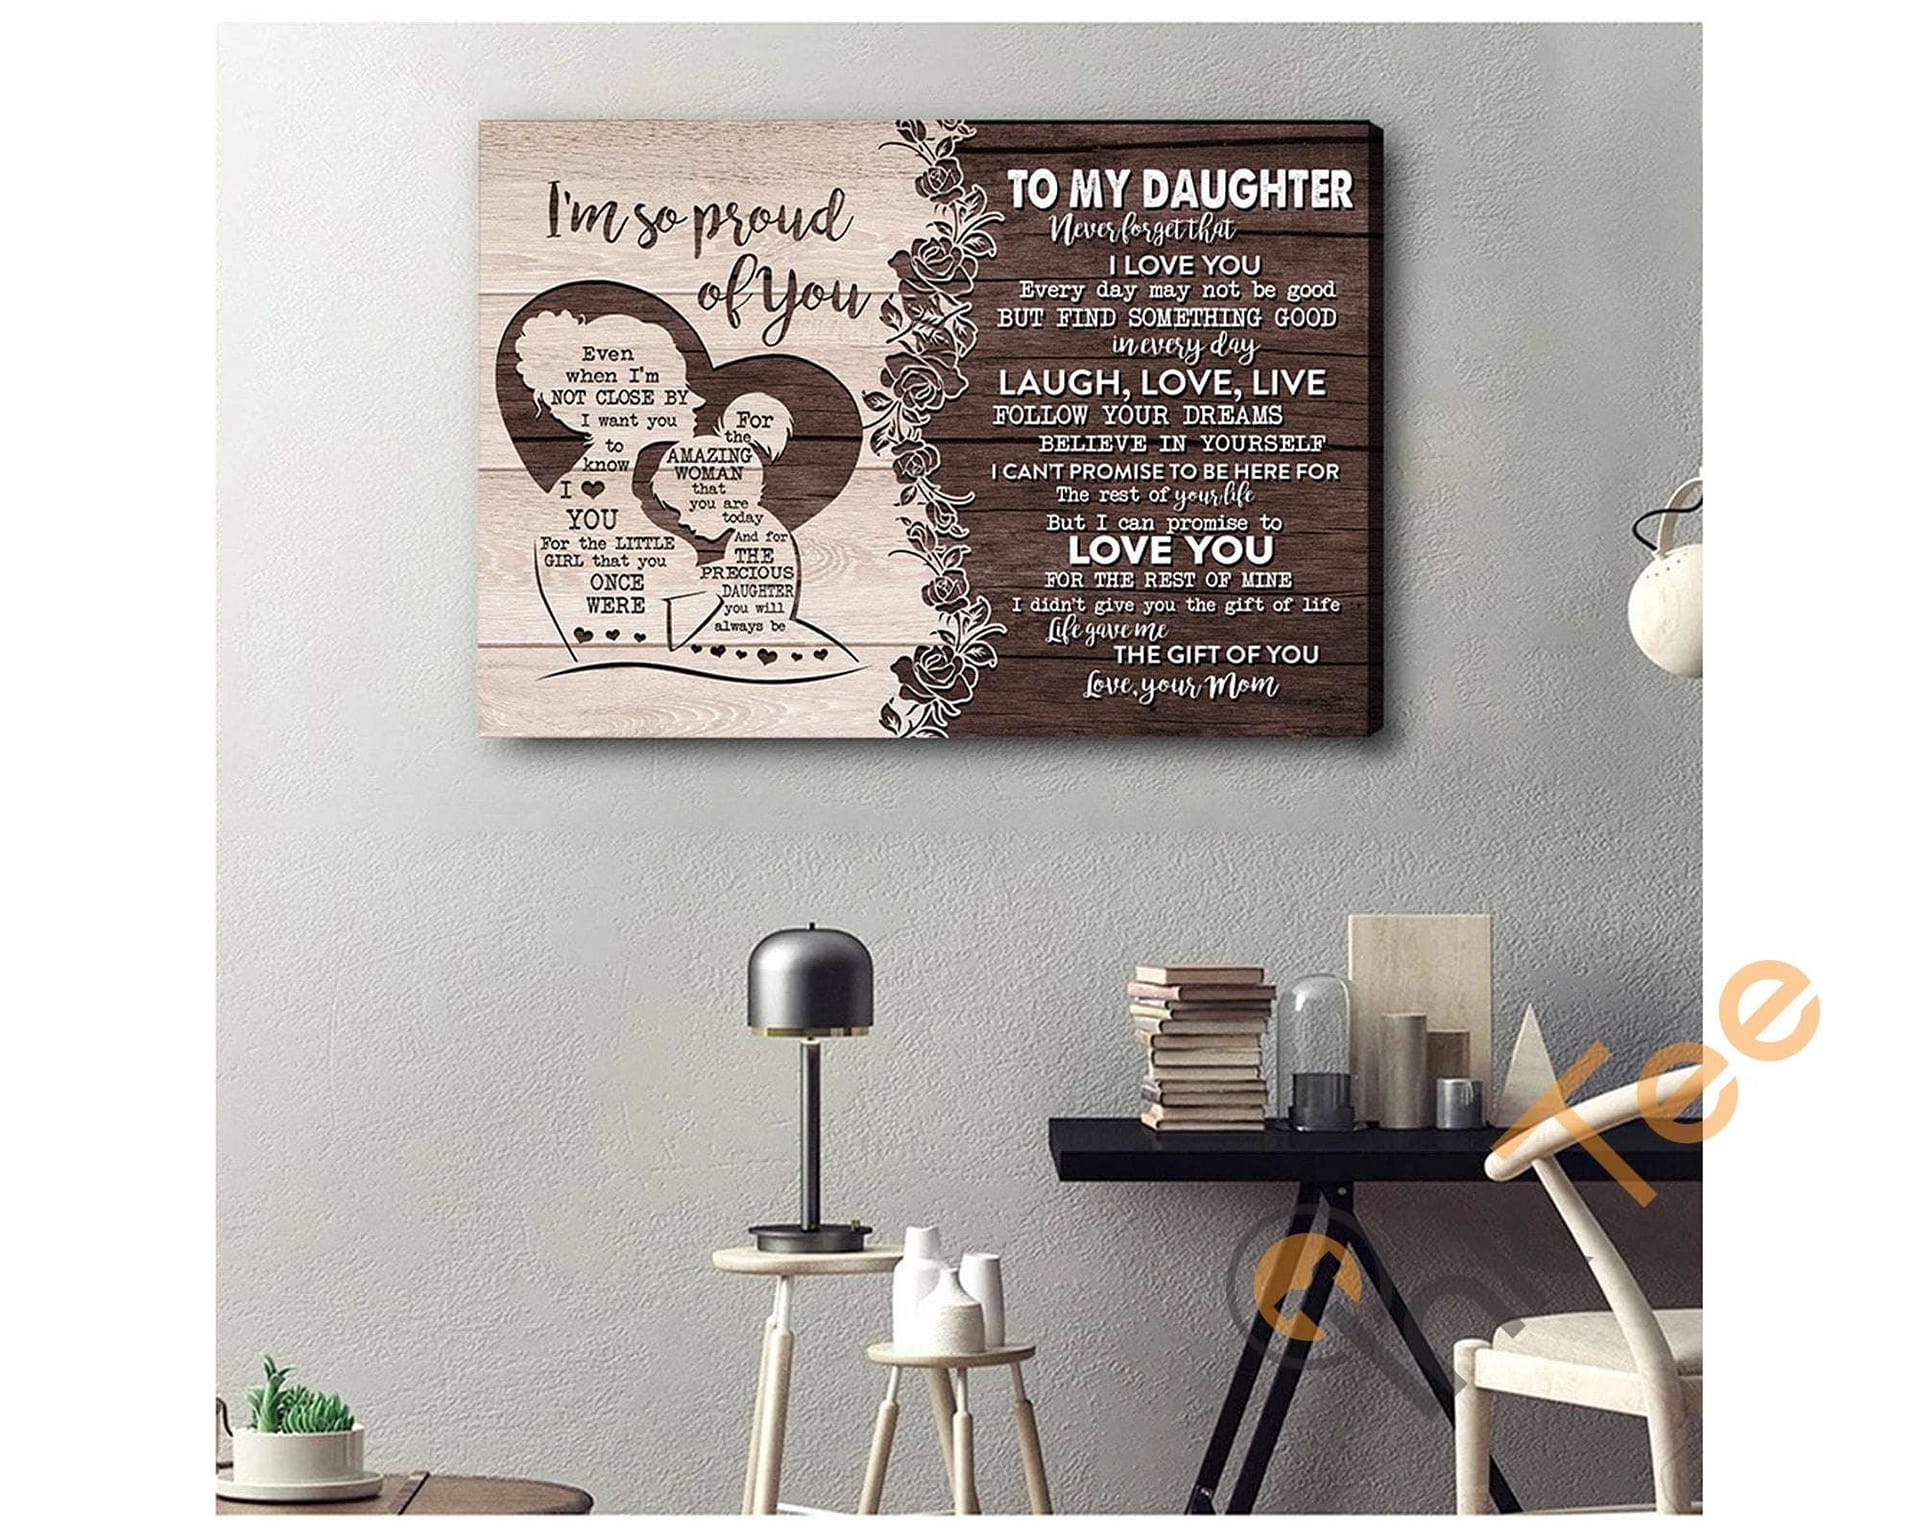 Proud Of Many Things In Life - Gift For Mother - Personalized